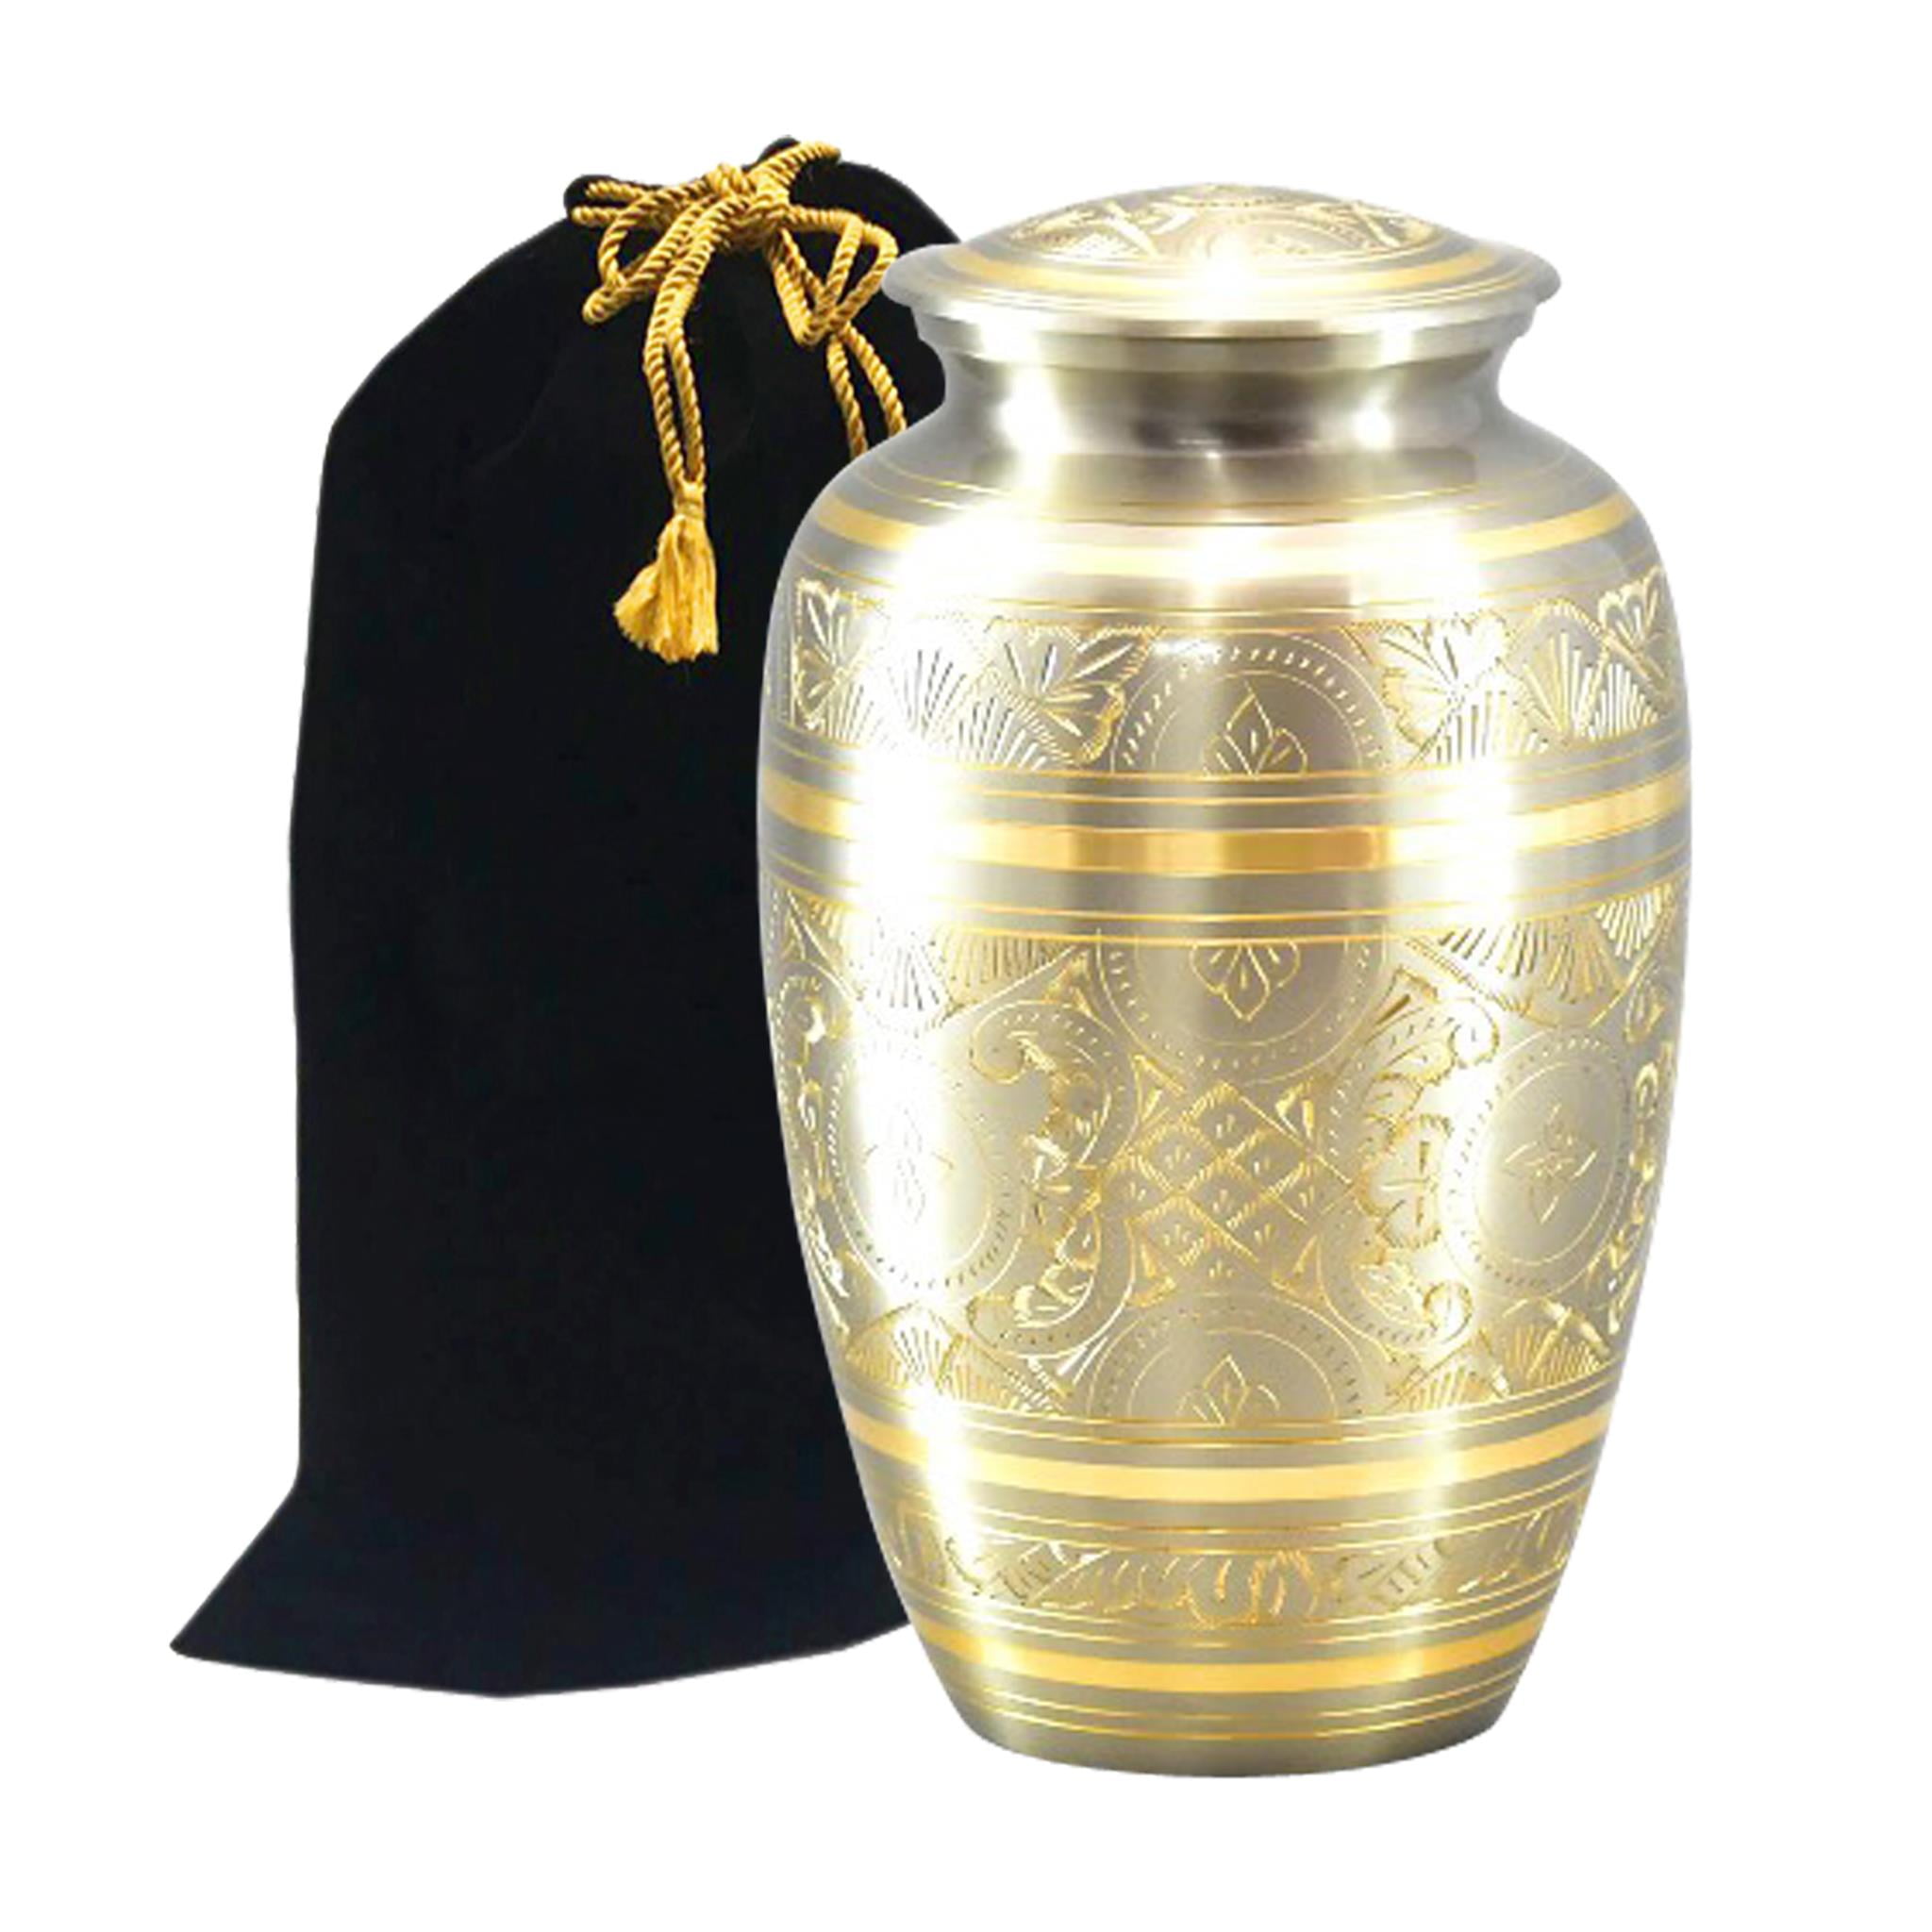 Platinum Gold Brass Cremation Urn Beautifully Handcrafted Adult Funeral  Urn Solid Brass Funeral Urn Affordable Urn for Human Ashes with Free  Velvet Bag